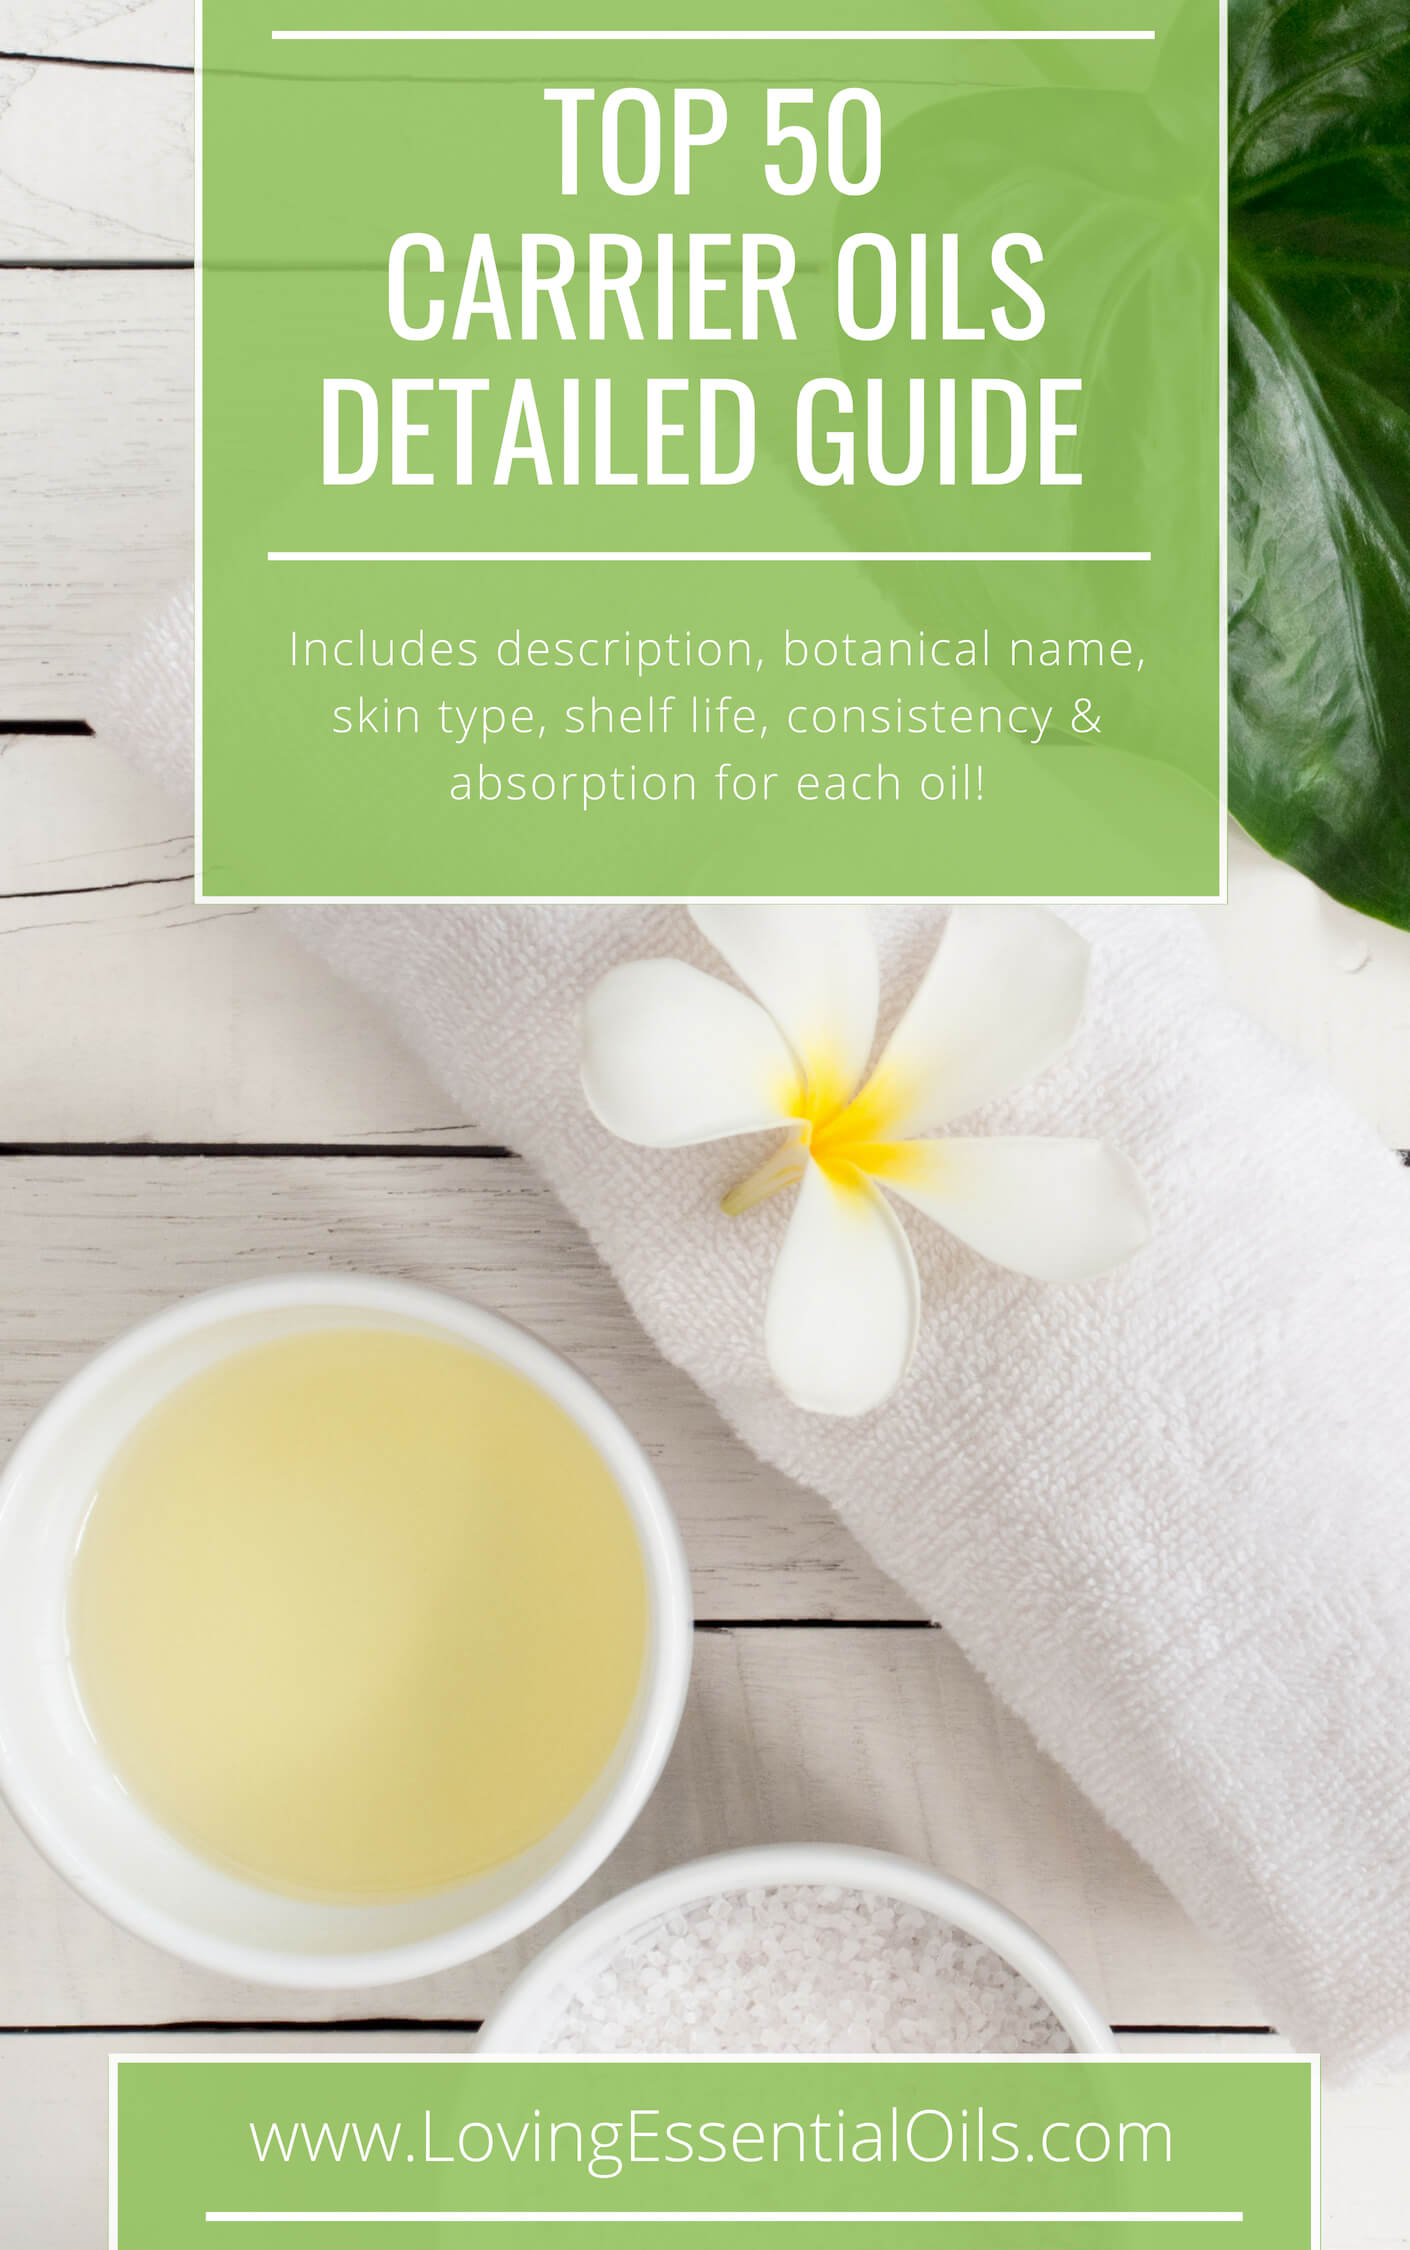 Carrier Oils for Essential oils - Free Detailed Guide by Loving Essential Oils